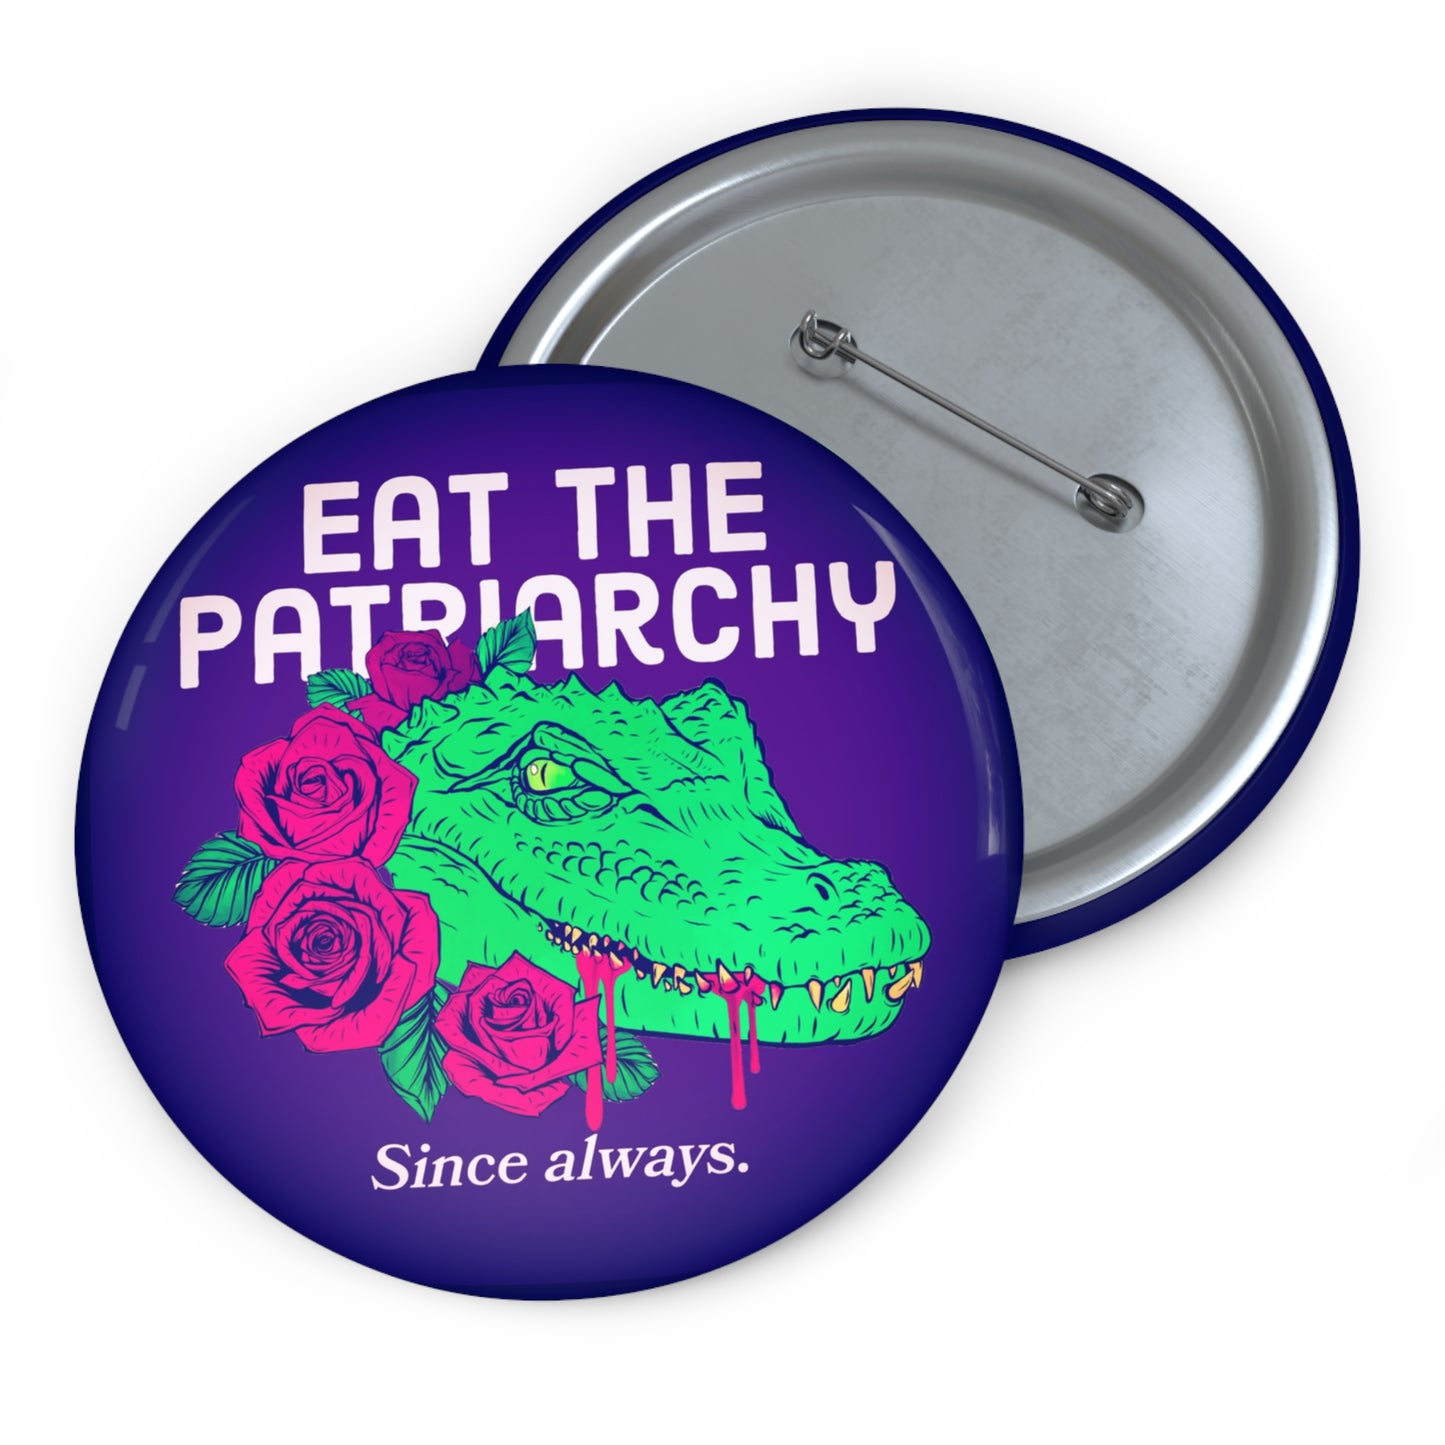 Eat the patriarchy